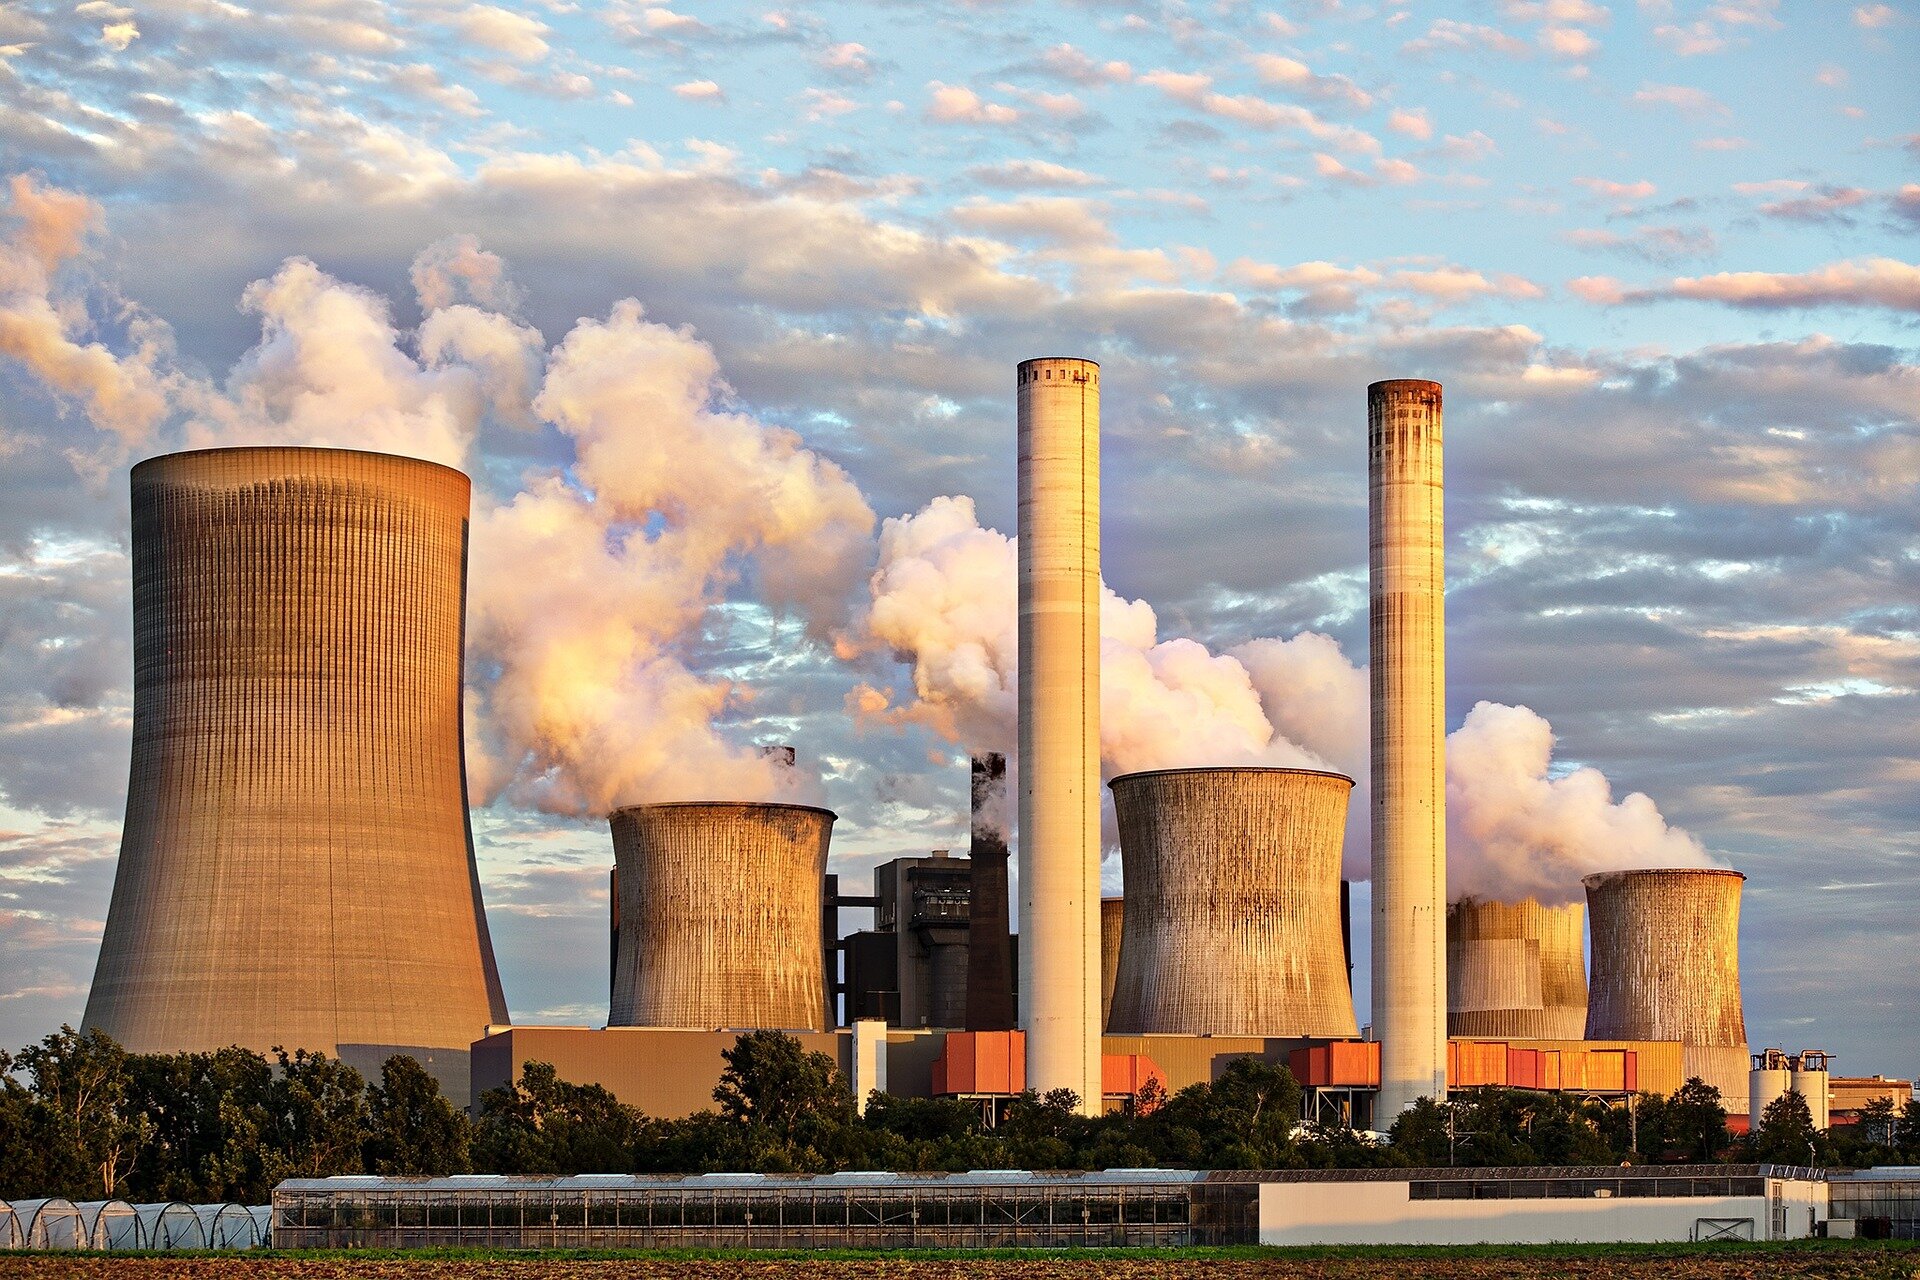 #South Africa’s new energy plan needs a mix of nuclear, gas, renewables and coal, says expert